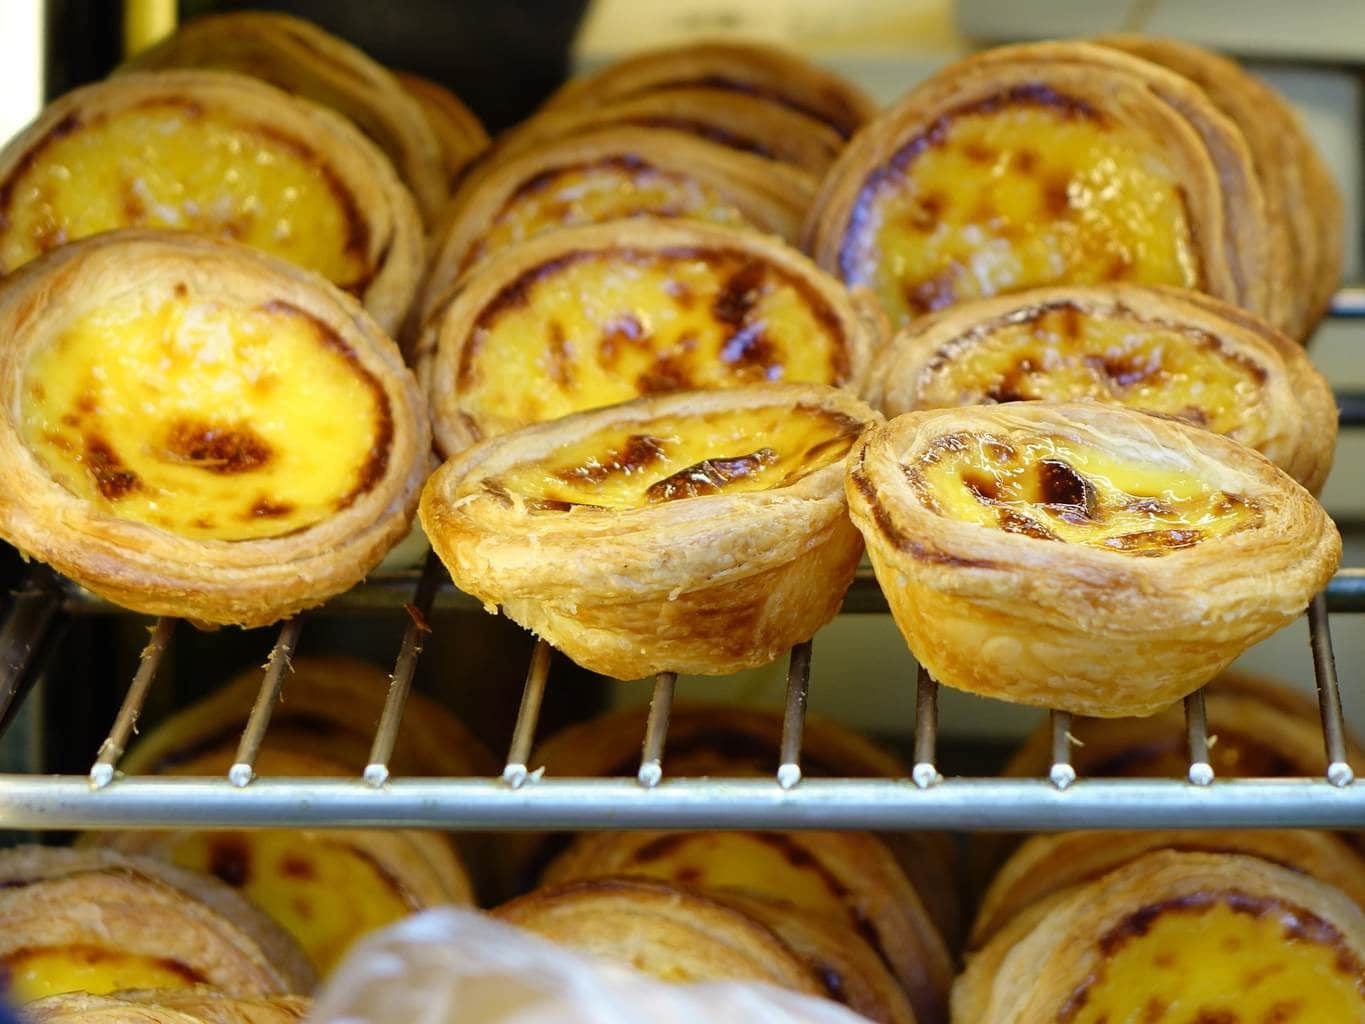 Trying the infamous egg tart at Lord Stow’s Bakery is a must on a day trip to Macau